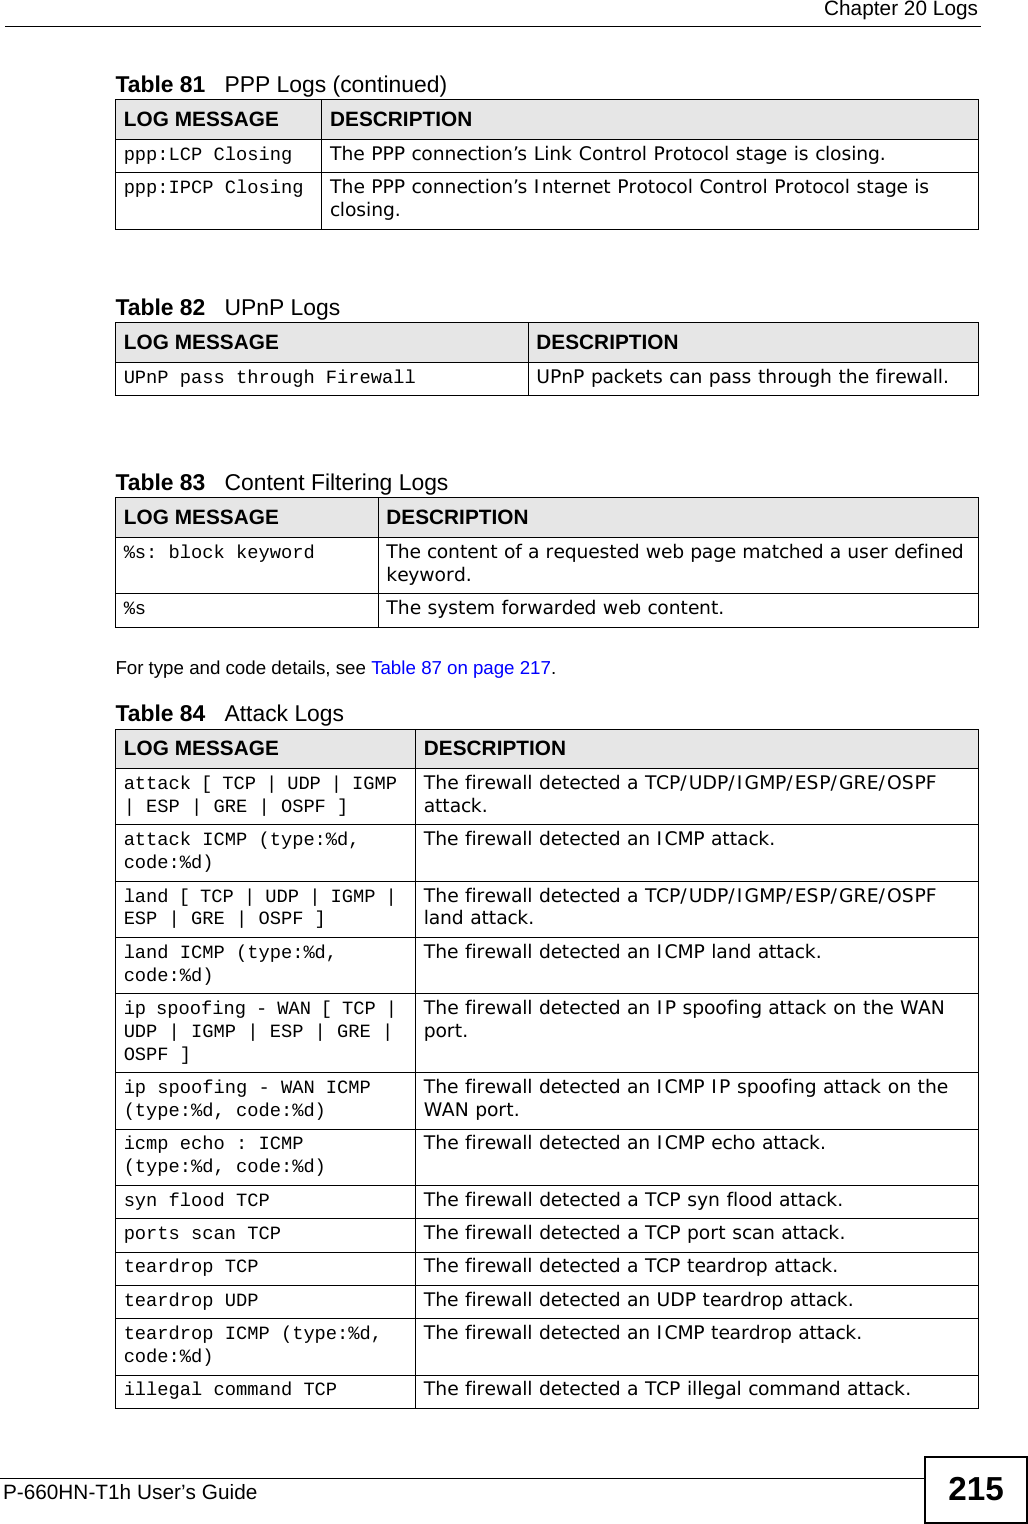  Chapter 20 LogsP-660HN-T1h User’s Guide 215   For type and code details, see Table 87 on page 217.ppp:LCP Closing The PPP connection’s Link Control Protocol stage is closing.ppp:IPCP Closing The PPP connection’s Internet Protocol Control Protocol stage is closing.Table 82   UPnP LogsLOG MESSAGE DESCRIPTIONUPnP pass through Firewall UPnP packets can pass through the firewall.Table 83   Content Filtering LogsLOG MESSAGE DESCRIPTION%s: block keyword The content of a requested web page matched a user defined keyword.%s The system forwarded web content.Table 84   Attack LogsLOG MESSAGE DESCRIPTIONattack [ TCP | UDP | IGMP | ESP | GRE | OSPF ] The firewall detected a TCP/UDP/IGMP/ESP/GRE/OSPF attack.attack ICMP (type:%d, code:%d) The firewall detected an ICMP attack.land [ TCP | UDP | IGMP | ESP | GRE | OSPF ] The firewall detected a TCP/UDP/IGMP/ESP/GRE/OSPF land attack.land ICMP (type:%d, code:%d) The firewall detected an ICMP land attack.ip spoofing - WAN [ TCP | UDP | IGMP | ESP | GRE | OSPF ]The firewall detected an IP spoofing attack on the WAN port.ip spoofing - WAN ICMP (type:%d, code:%d) The firewall detected an ICMP IP spoofing attack on the WAN port. icmp echo : ICMP (type:%d, code:%d) The firewall detected an ICMP echo attack. syn flood TCP The firewall detected a TCP syn flood attack.ports scan TCP The firewall detected a TCP port scan attack.teardrop TCP The firewall detected a TCP teardrop attack.teardrop UDP The firewall detected an UDP teardrop attack.teardrop ICMP (type:%d, code:%d) The firewall detected an ICMP teardrop attack. illegal command TCP The firewall detected a TCP illegal command attack.Table 81   PPP Logs (continued)LOG MESSAGE DESCRIPTION